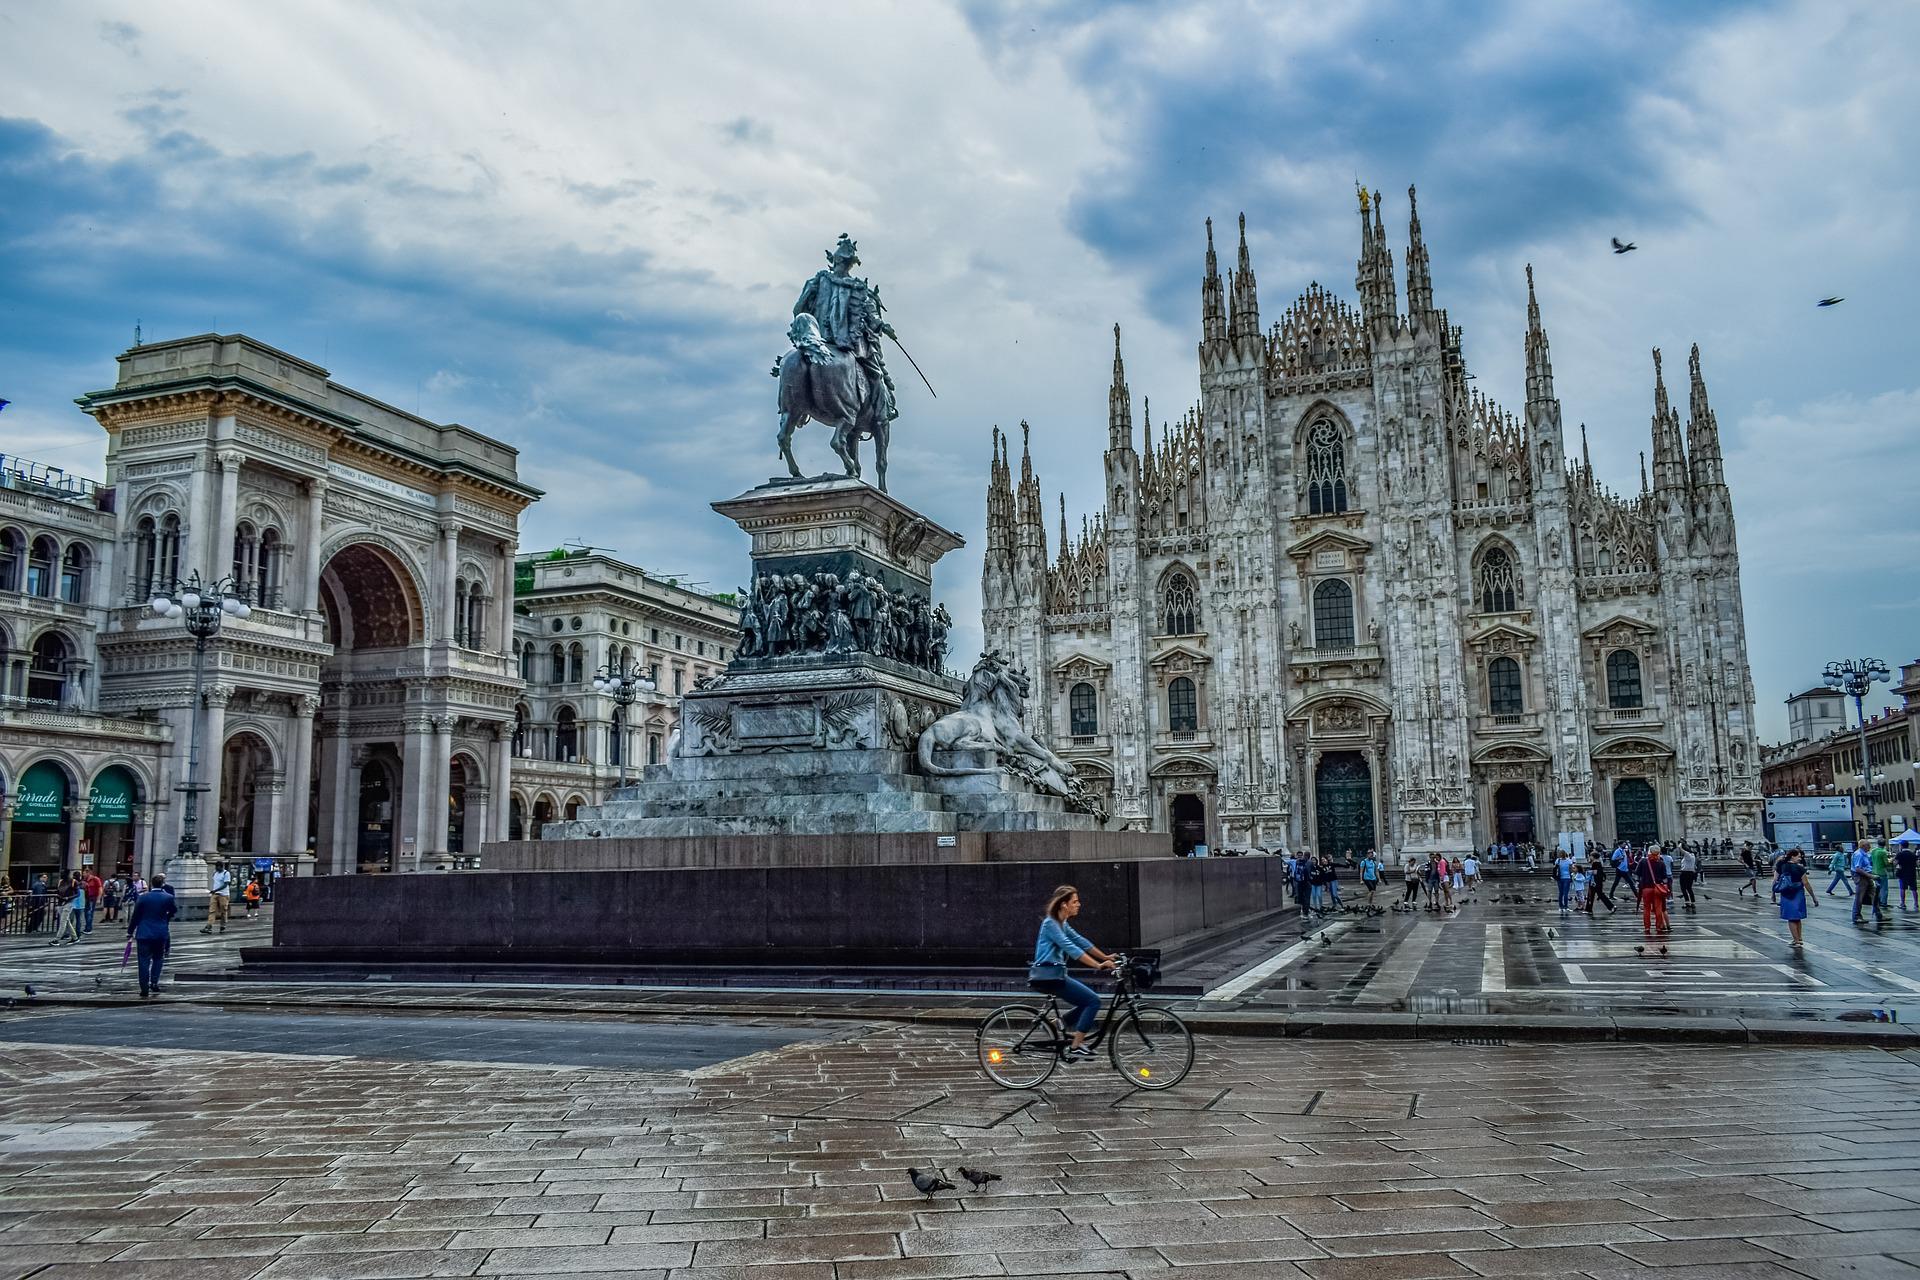 Why is Milan one of the most preferred destinations for tourists? What is Milan famous for?